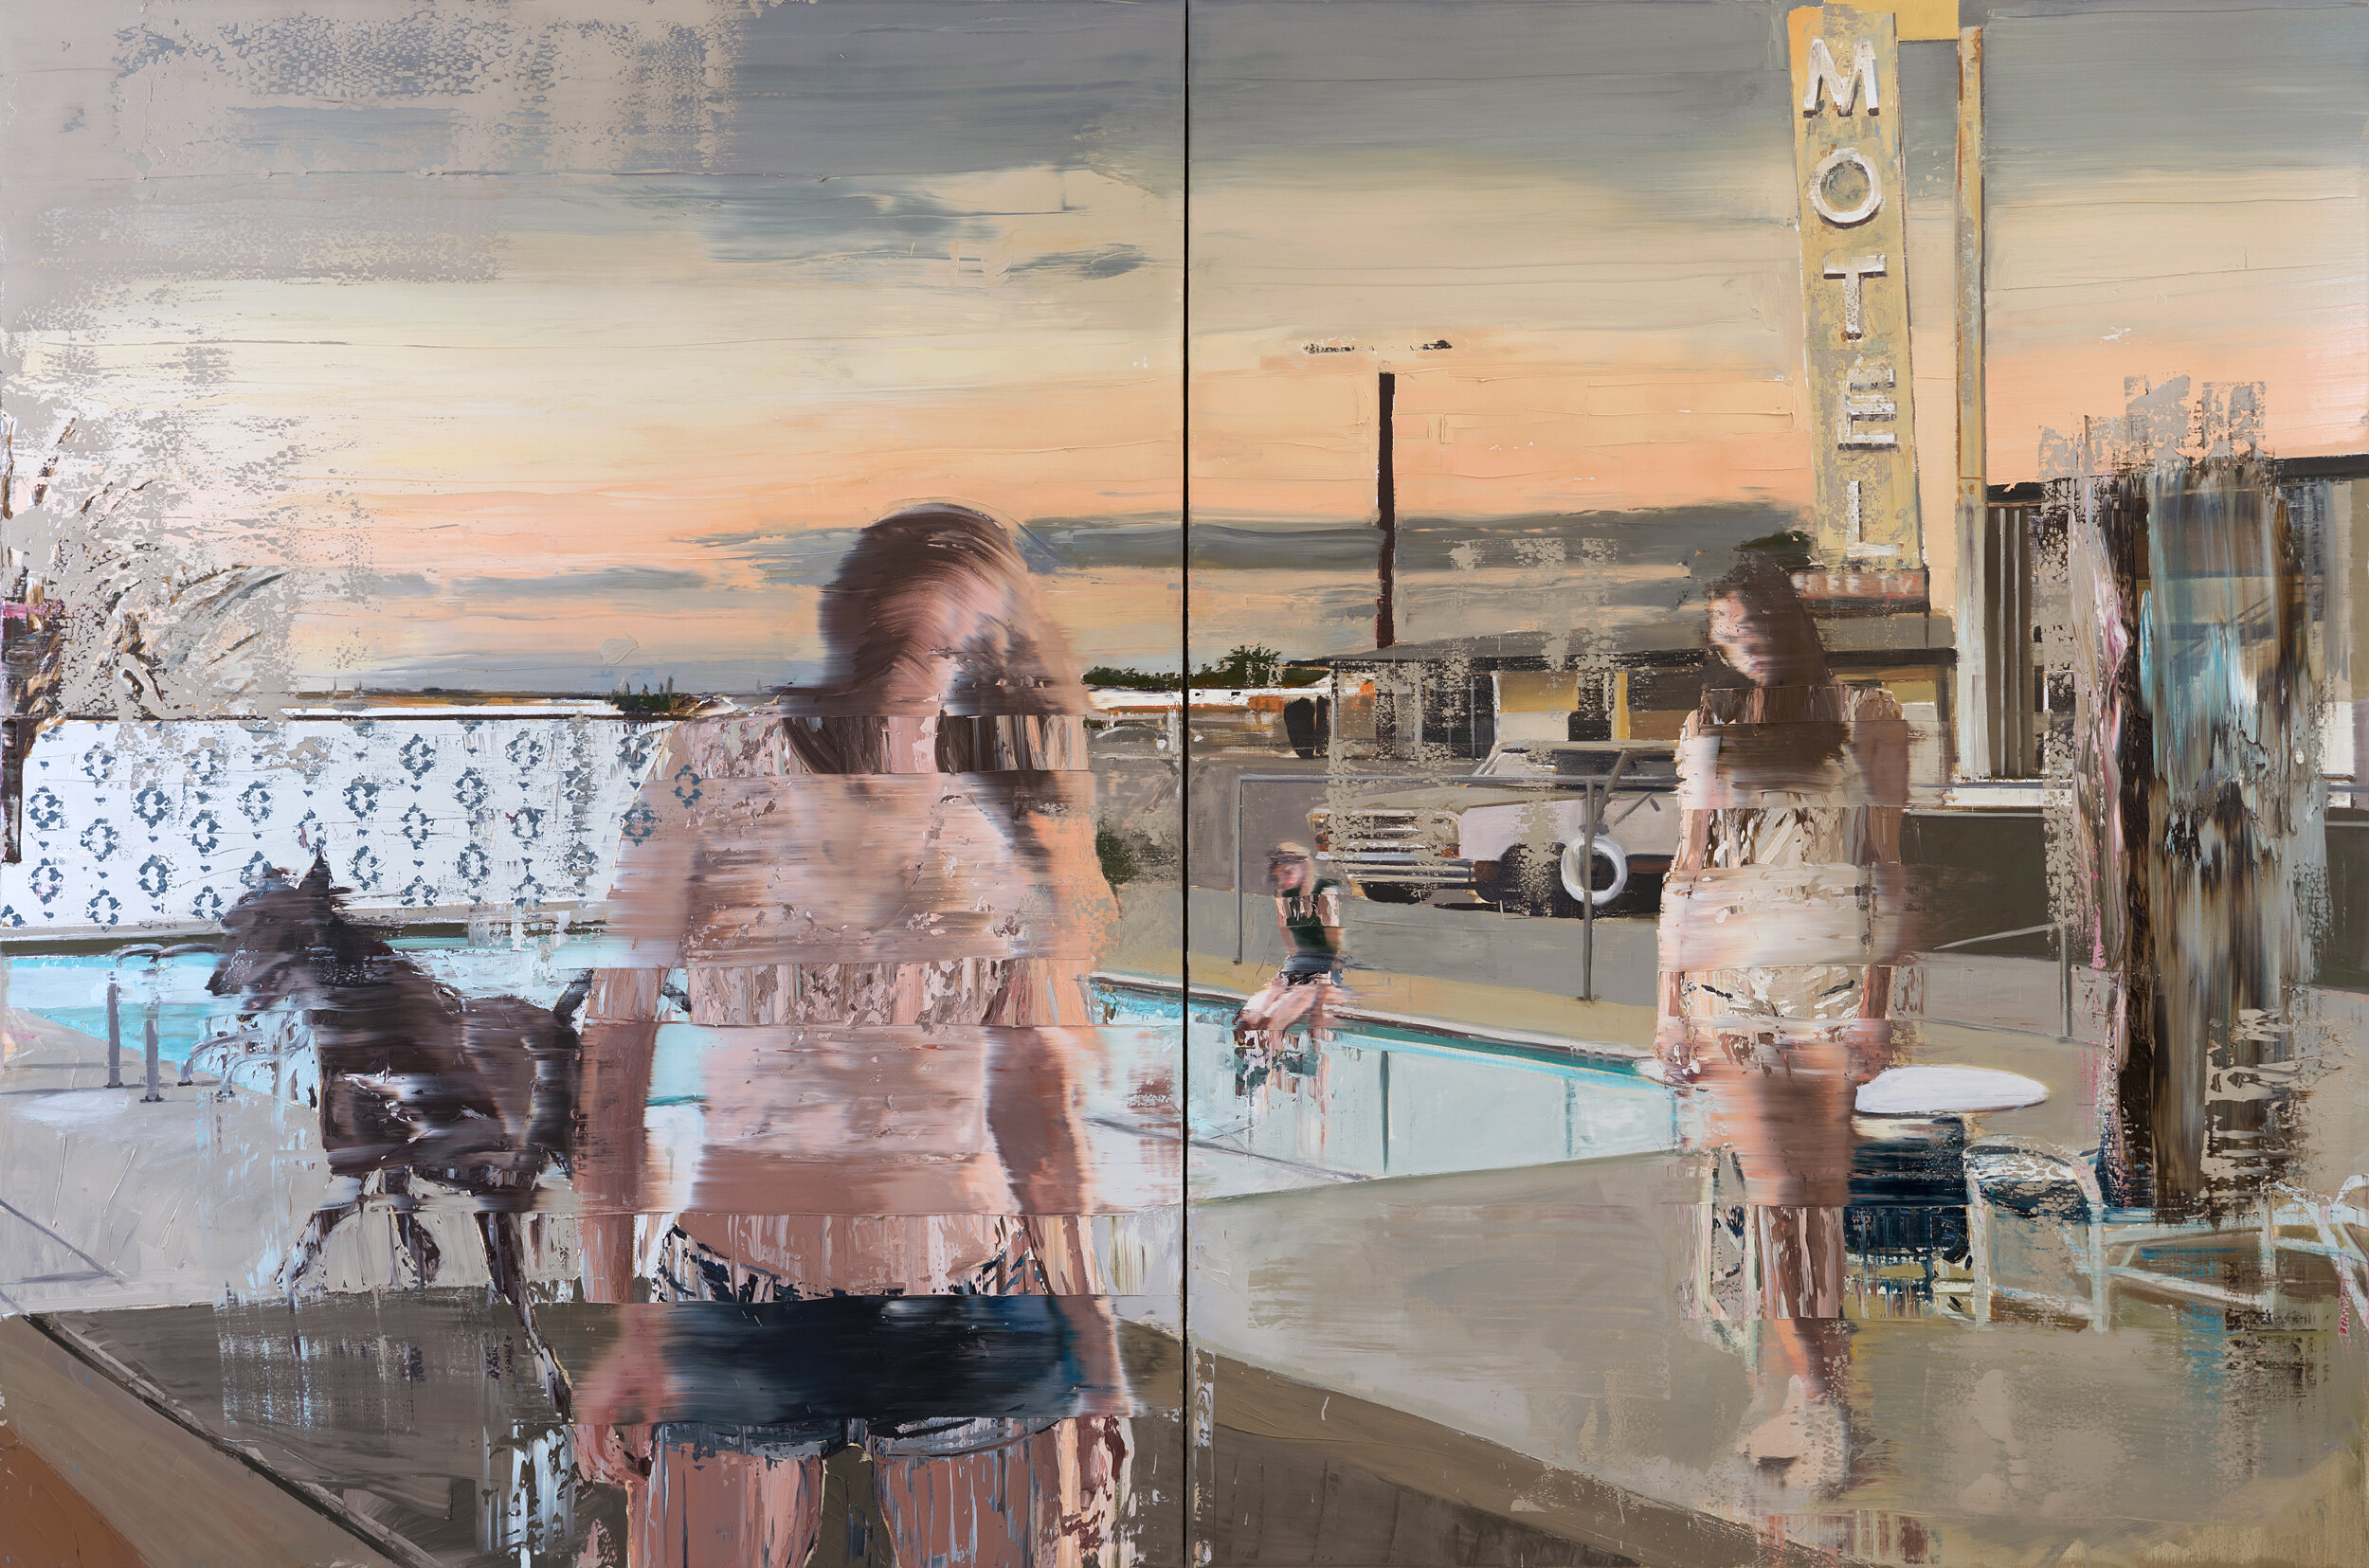   The Pool I,  2018                                                                                                         Oil on canvas, 200 x 300 cm                                                                                          Private c